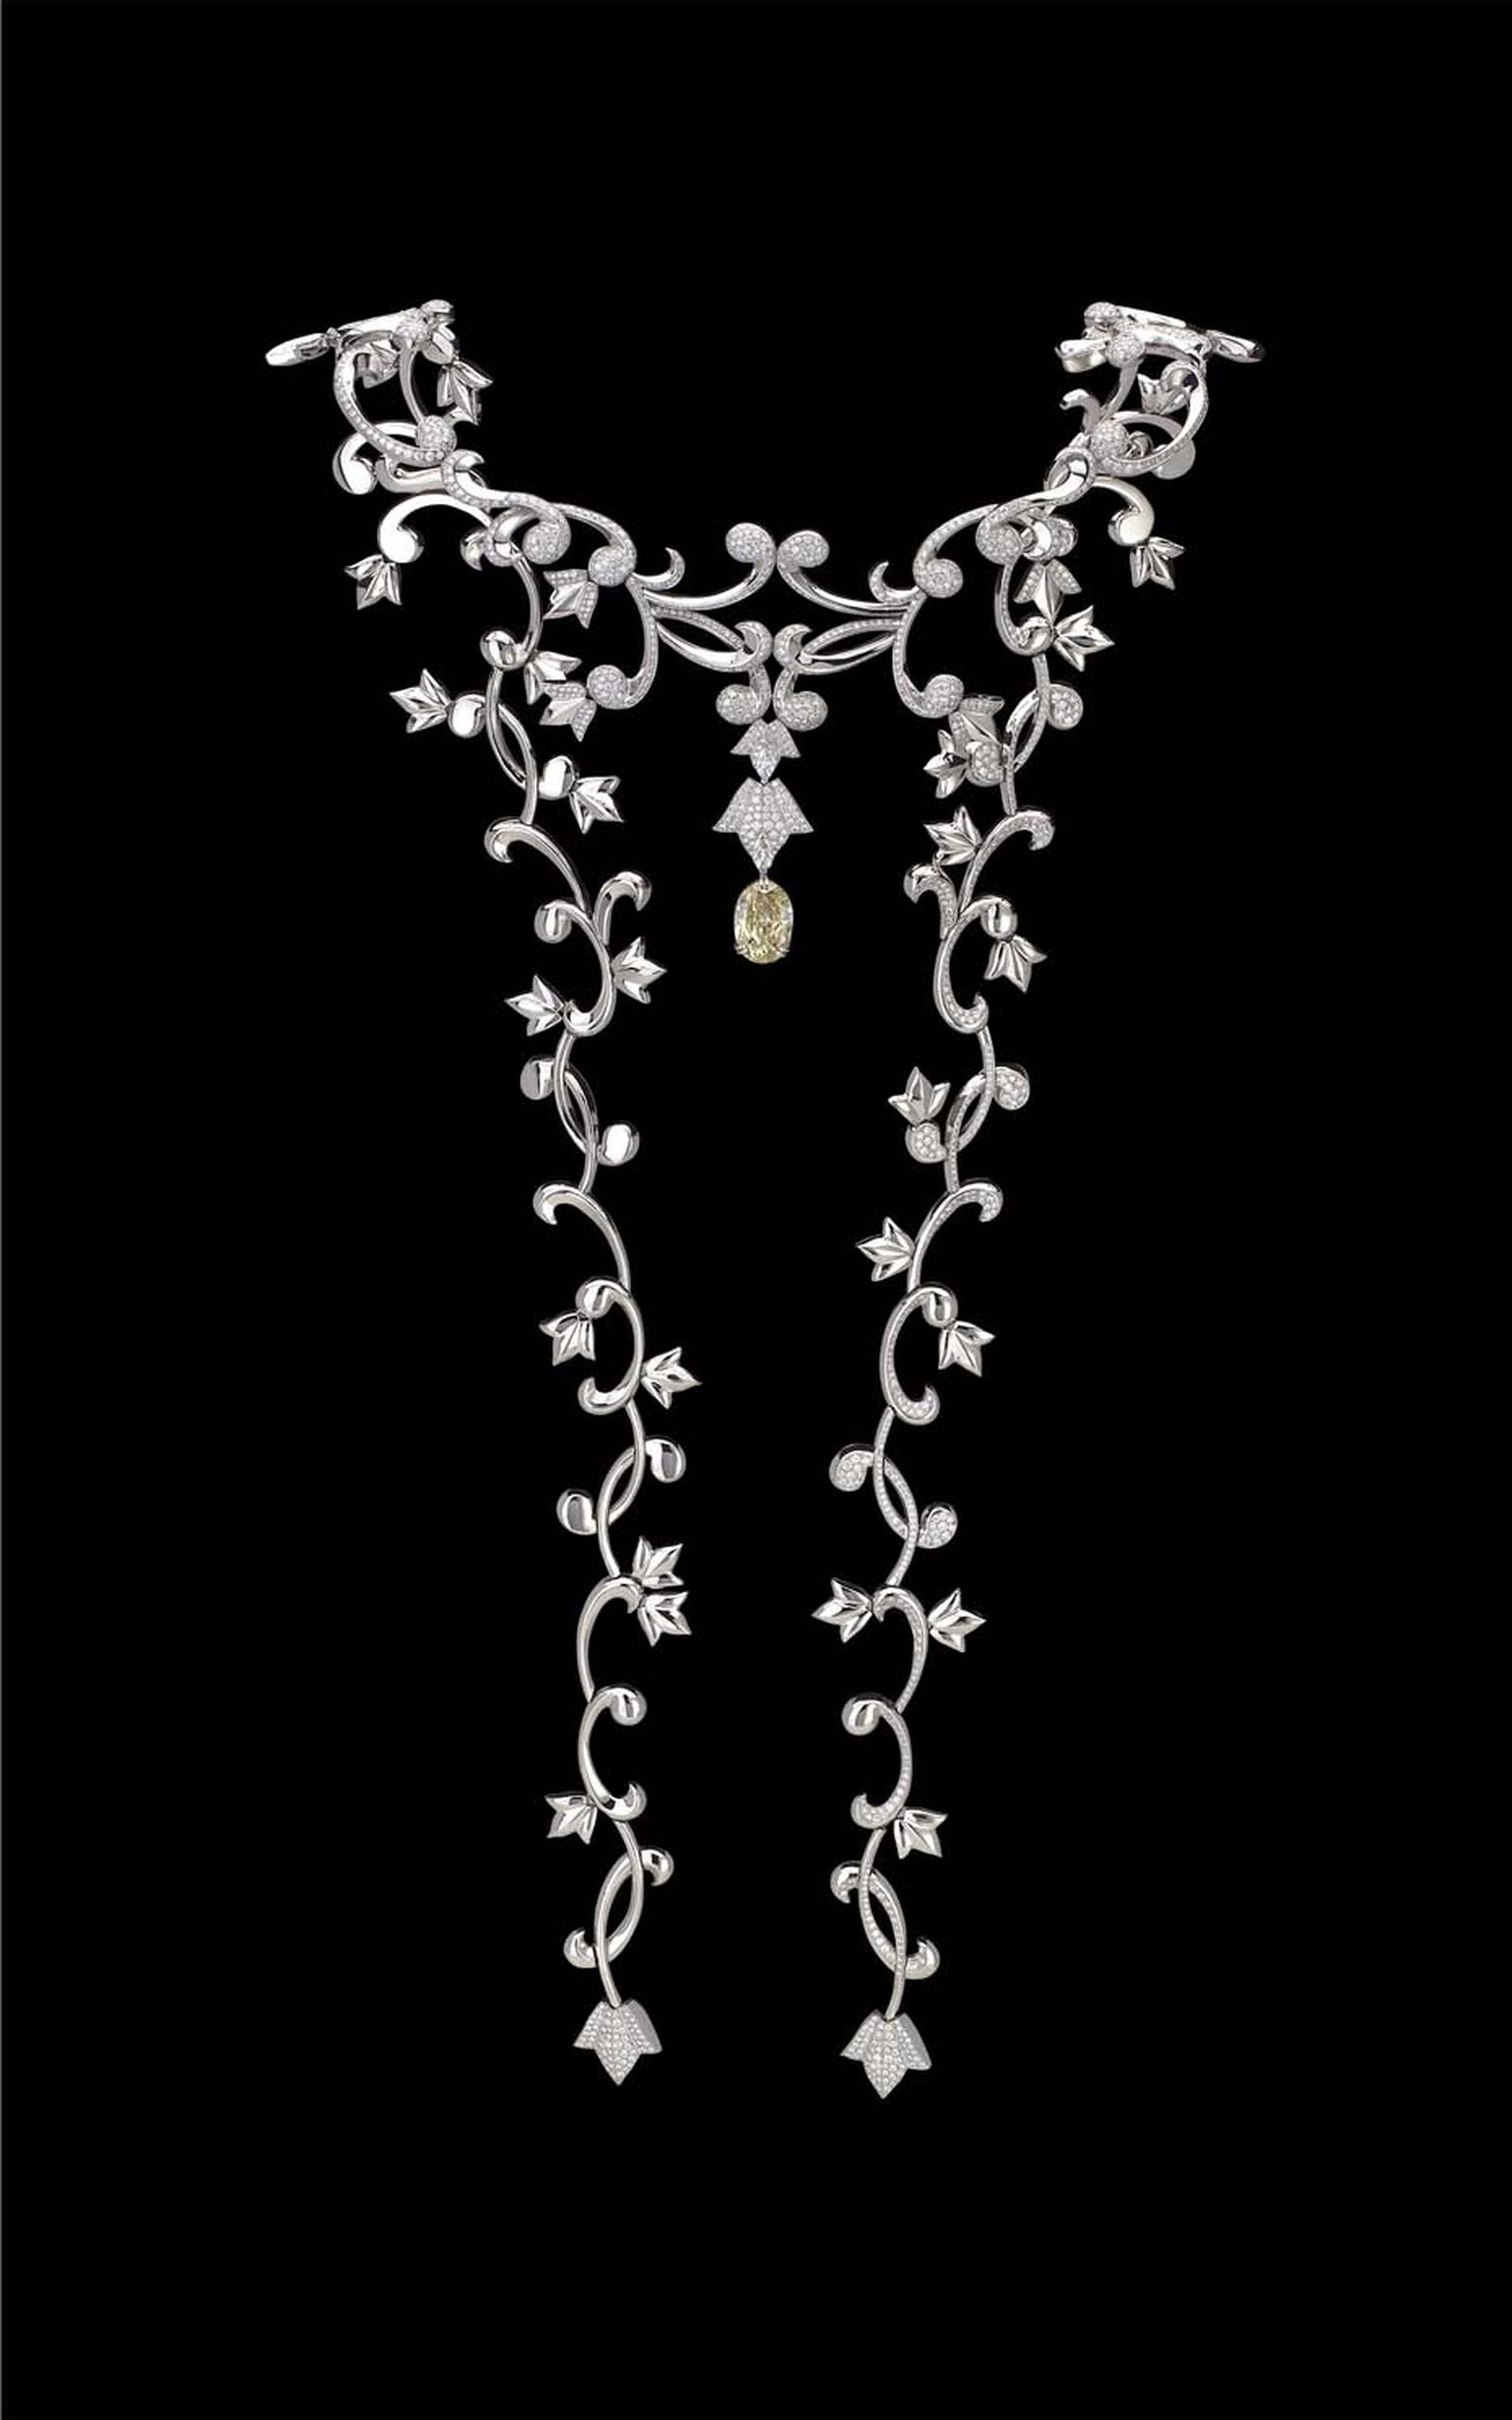 Mellerio dits Meller Secrets de Lys platinum necklace featuring a large oval yellow diamond weighing 11.56ct in the central corsage.